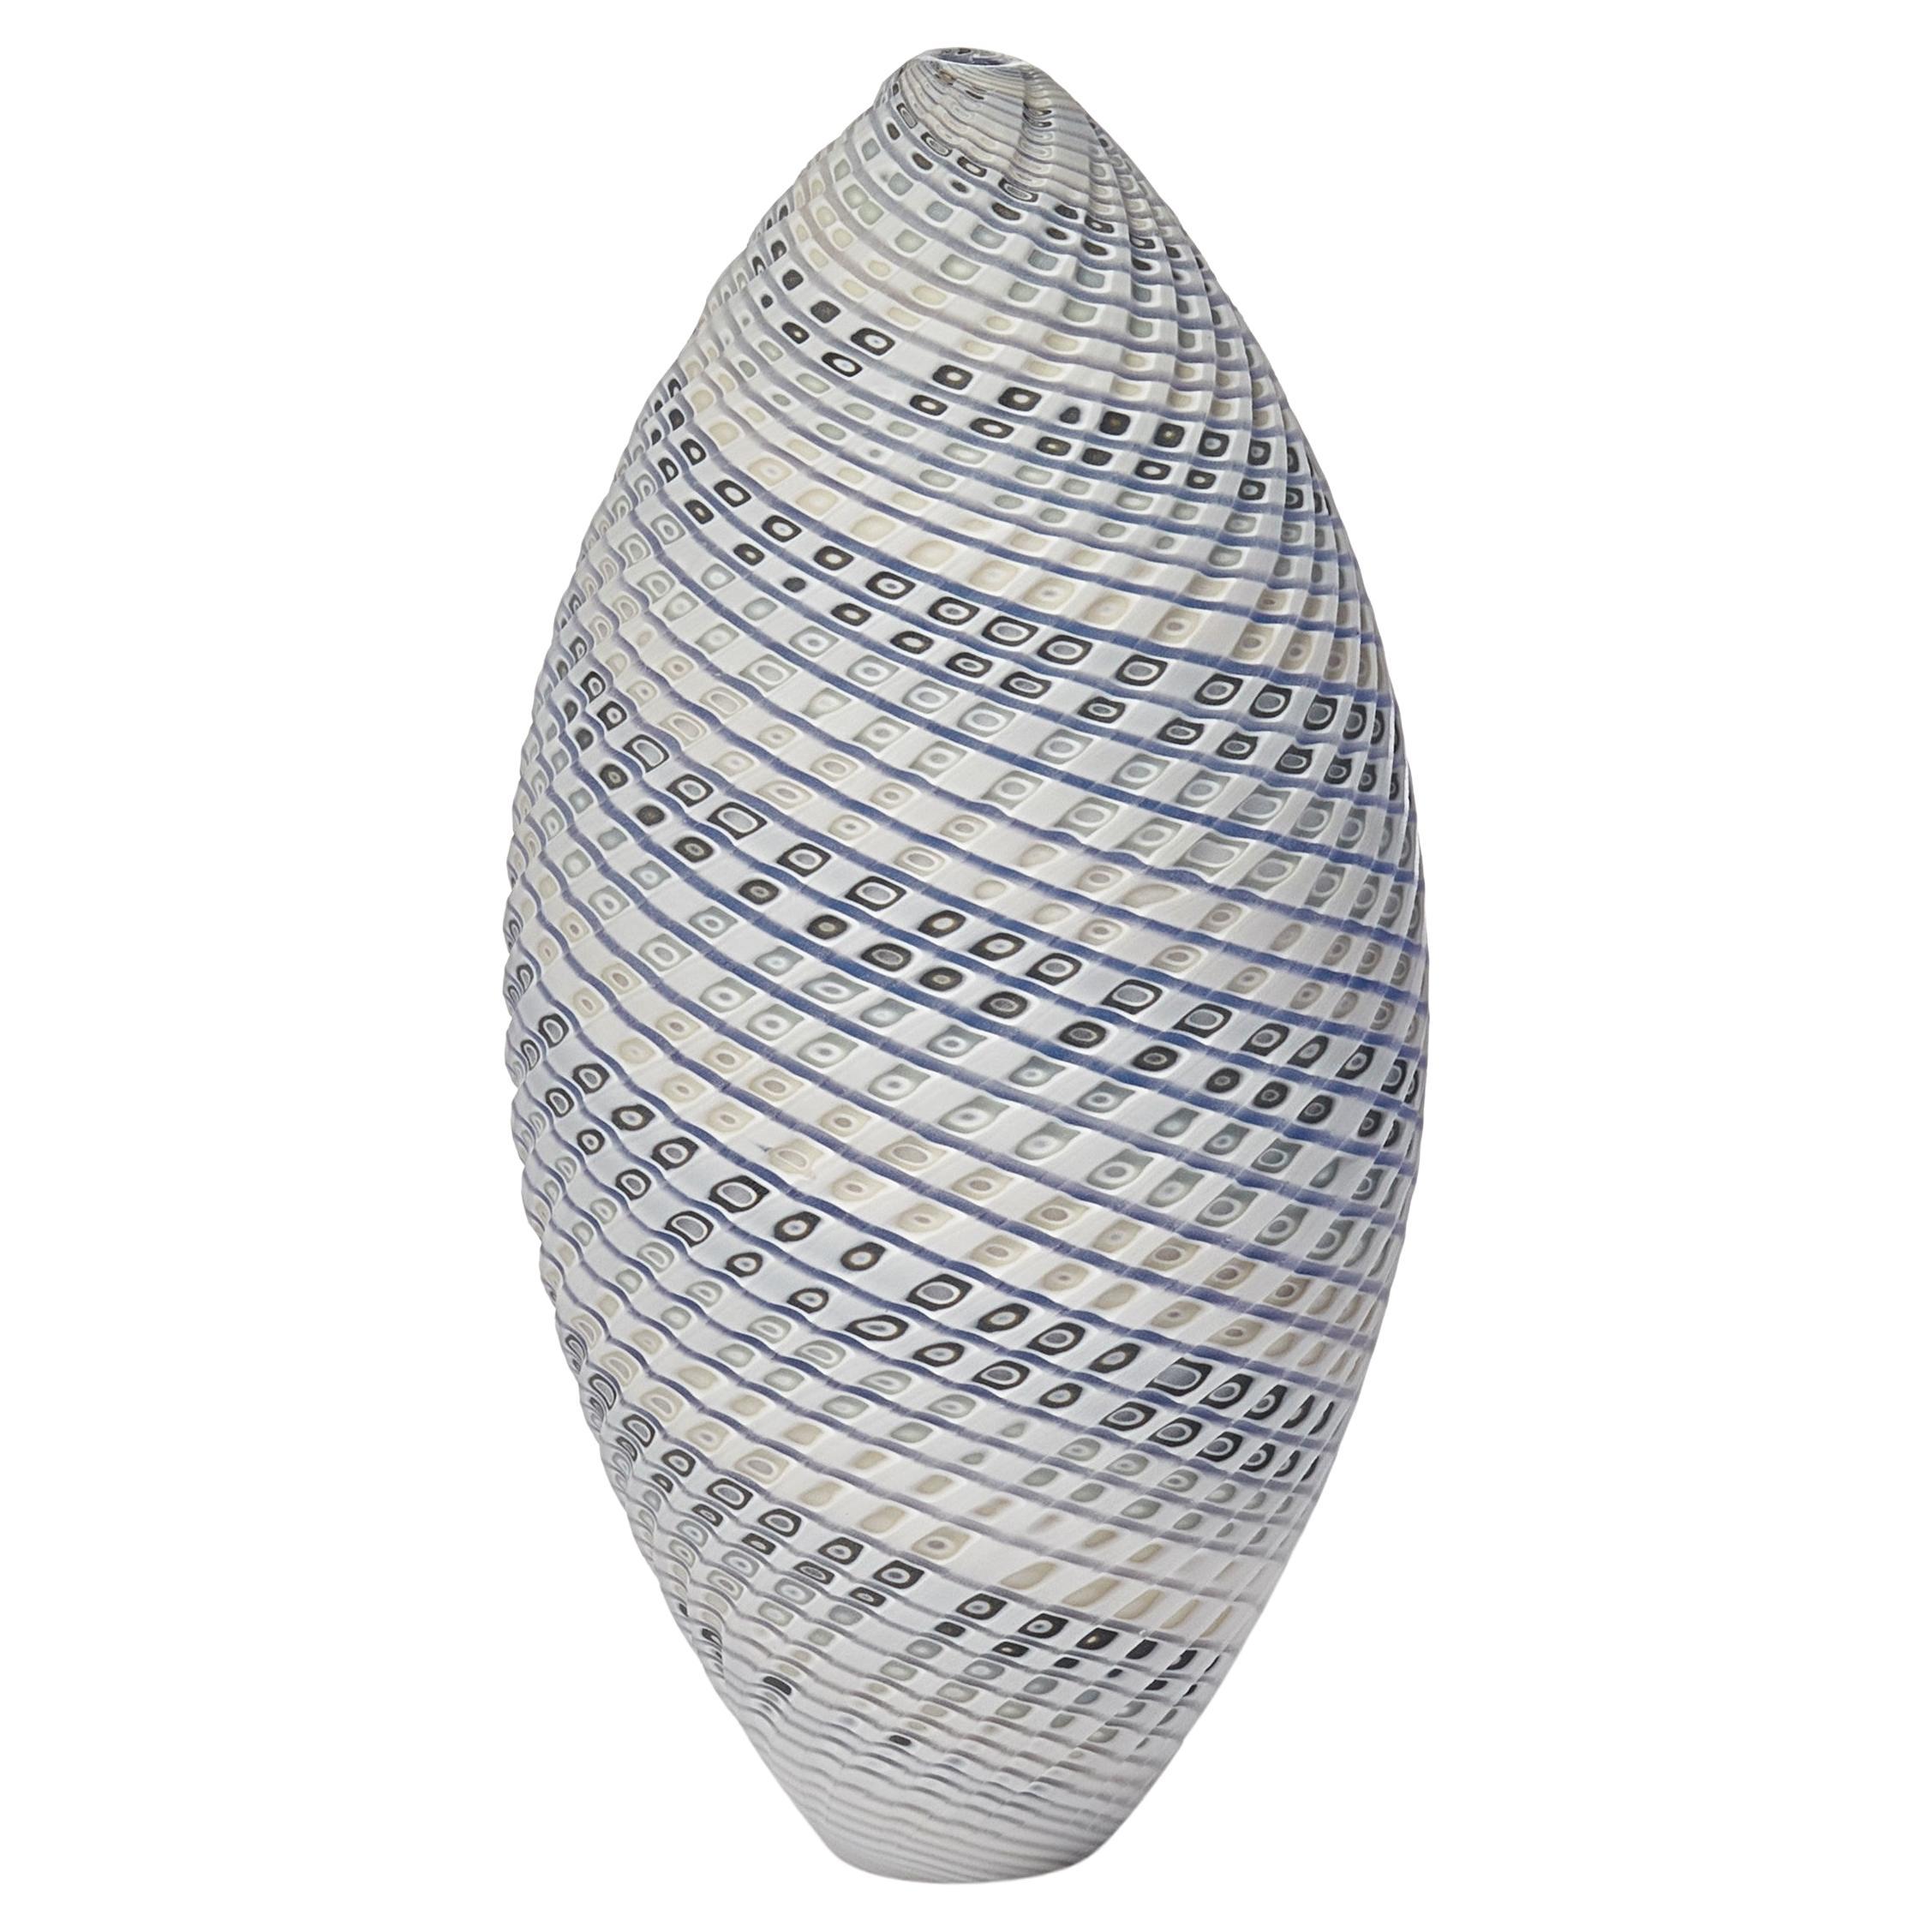 Woven Three Tone Blue Ovoid (sm), textured handblown glass vessel by Layne Rowe For Sale